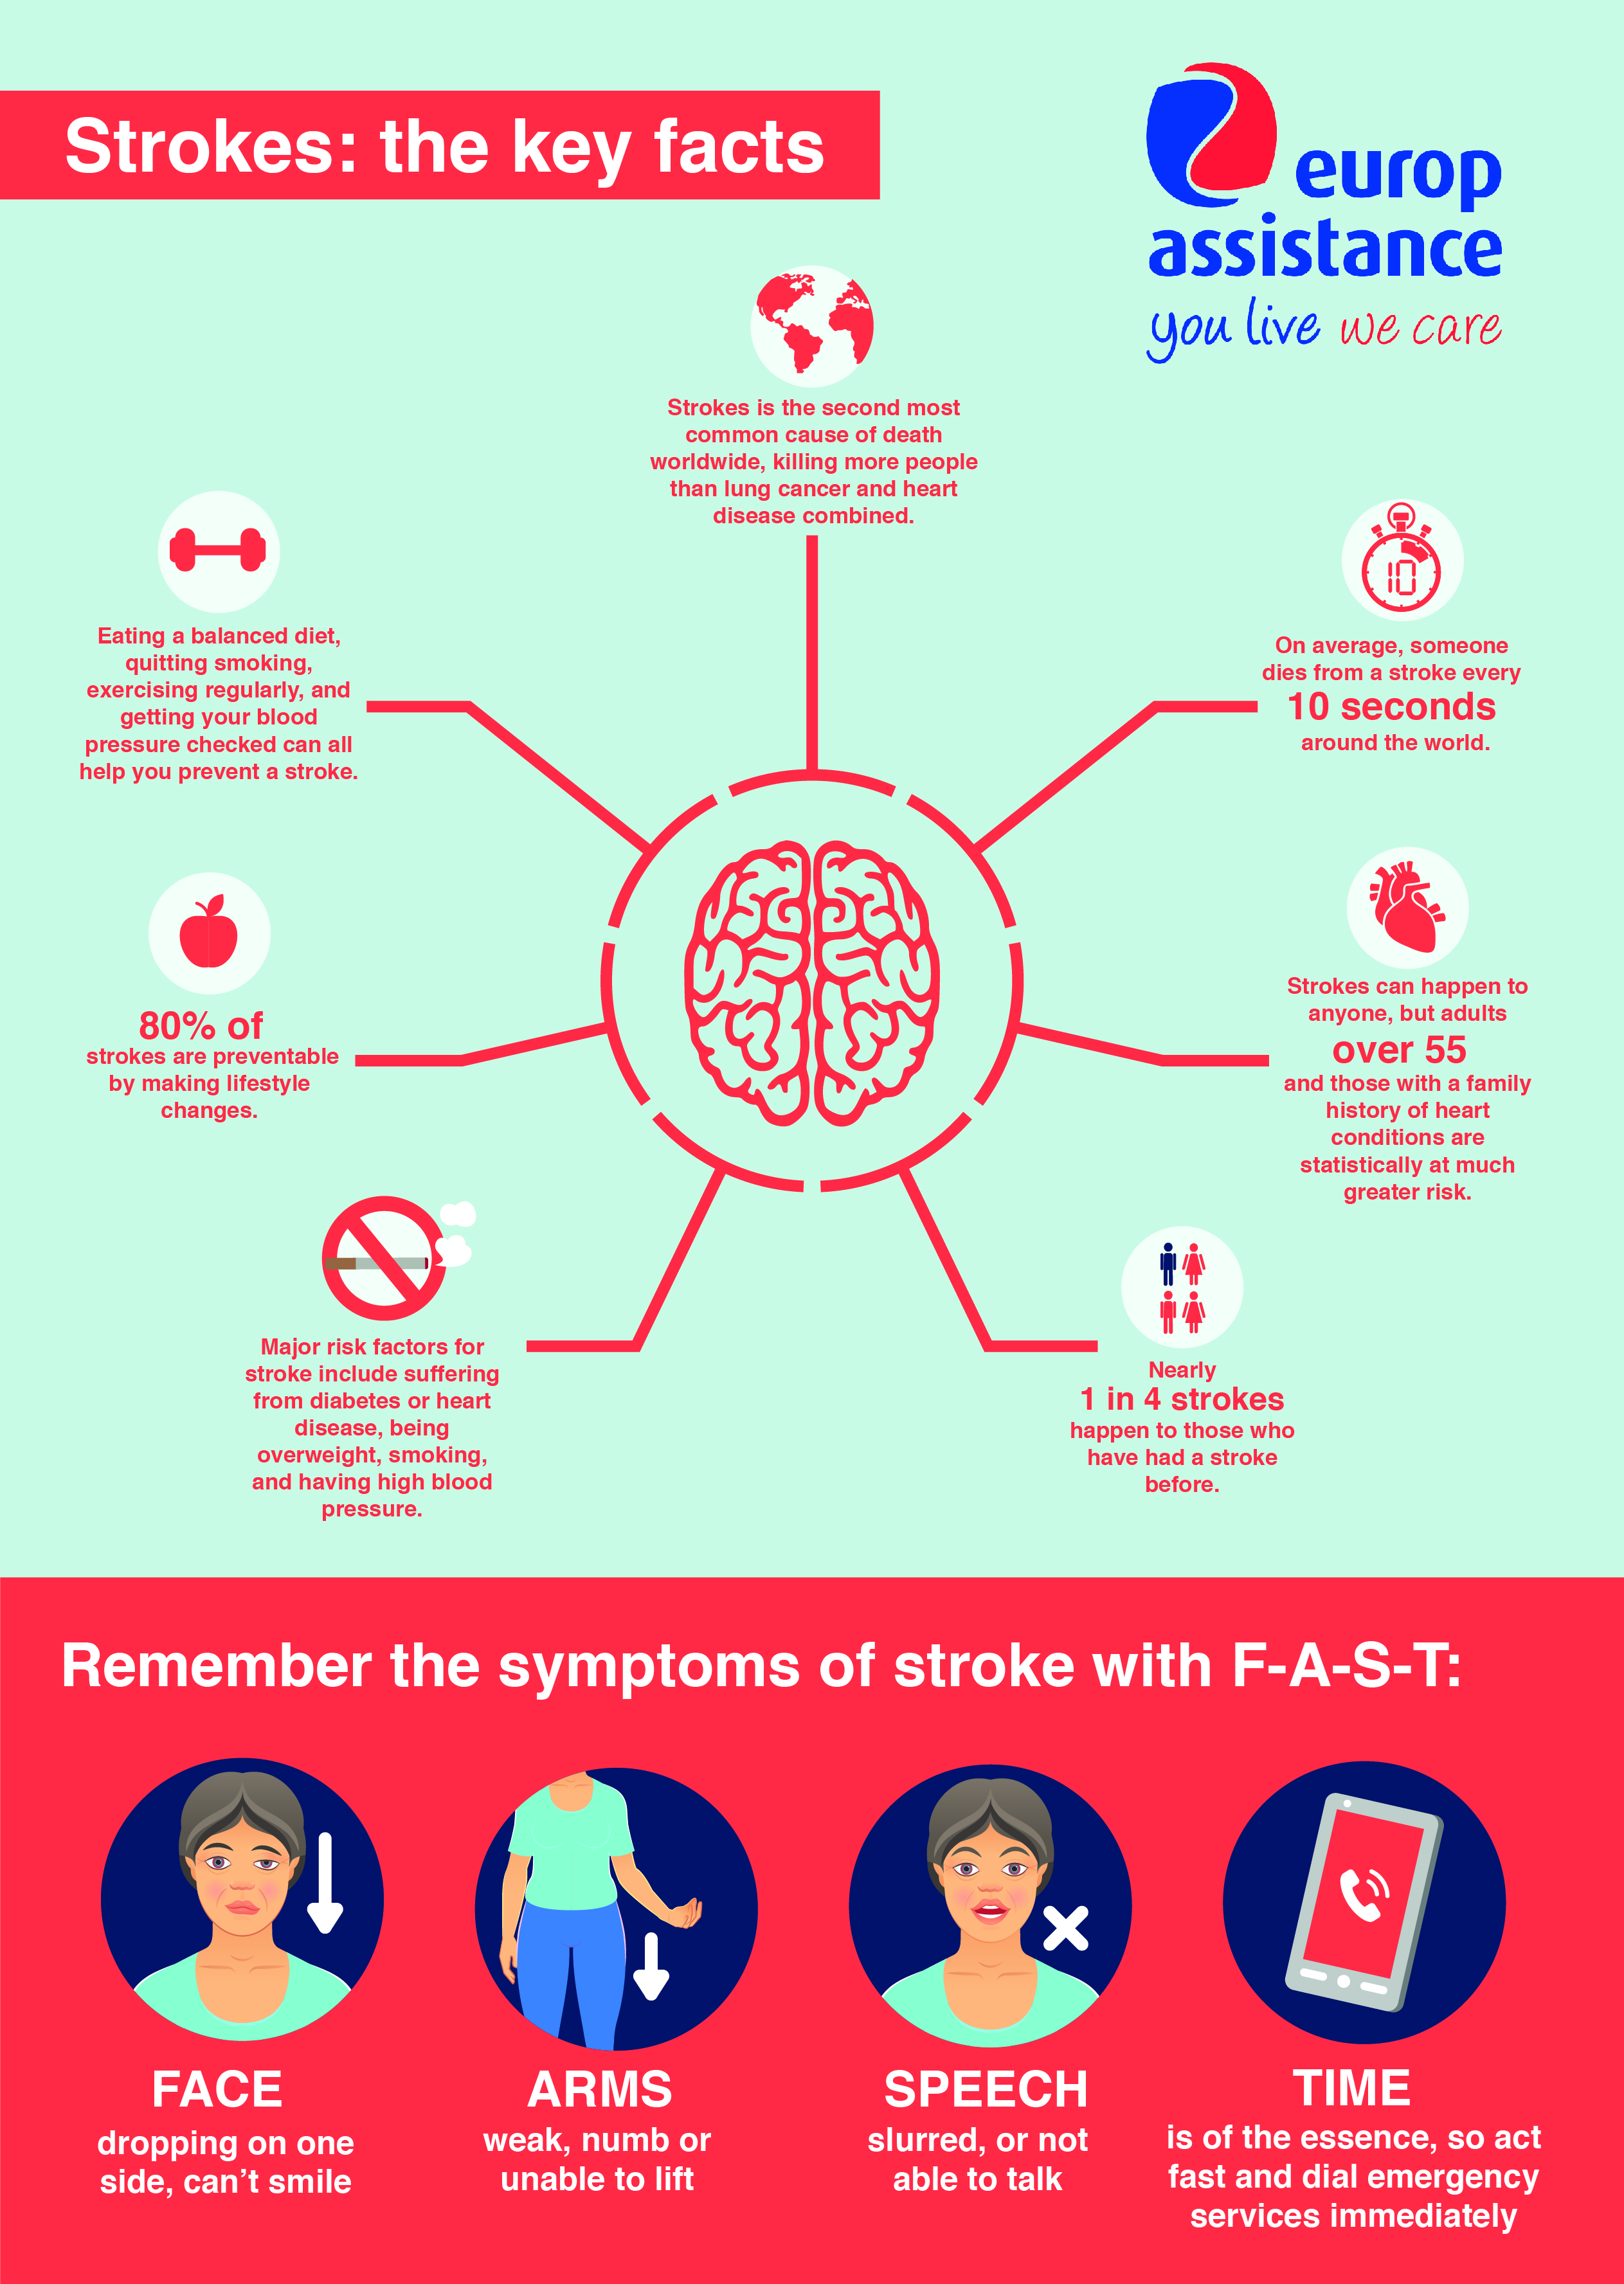 Key facts about strokes